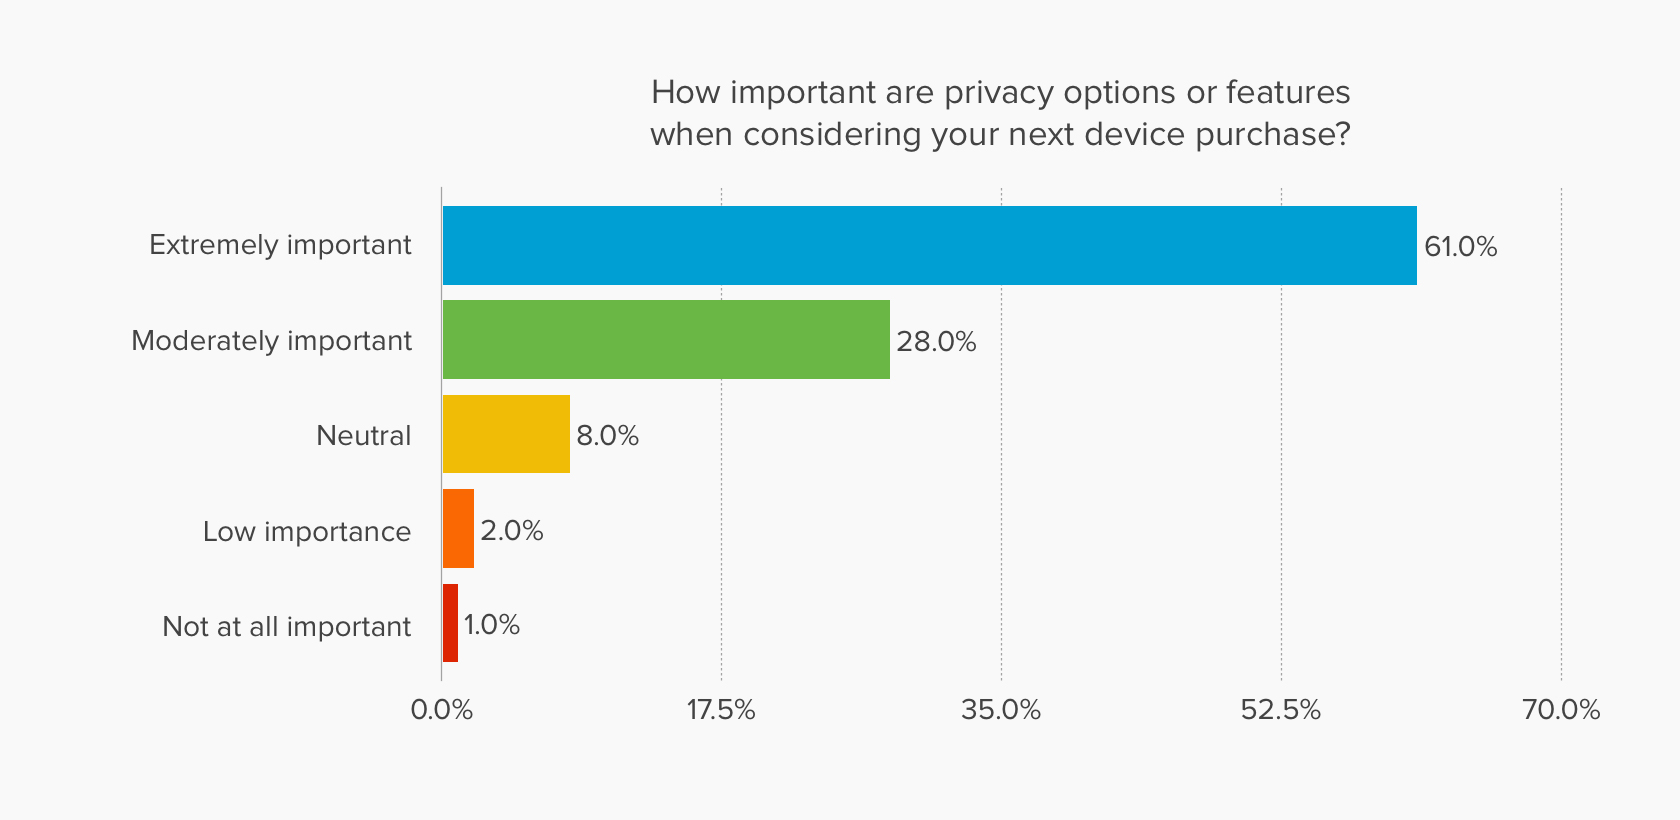 Chart showing that privacy options are extremely important for most people when considering buying a new device.